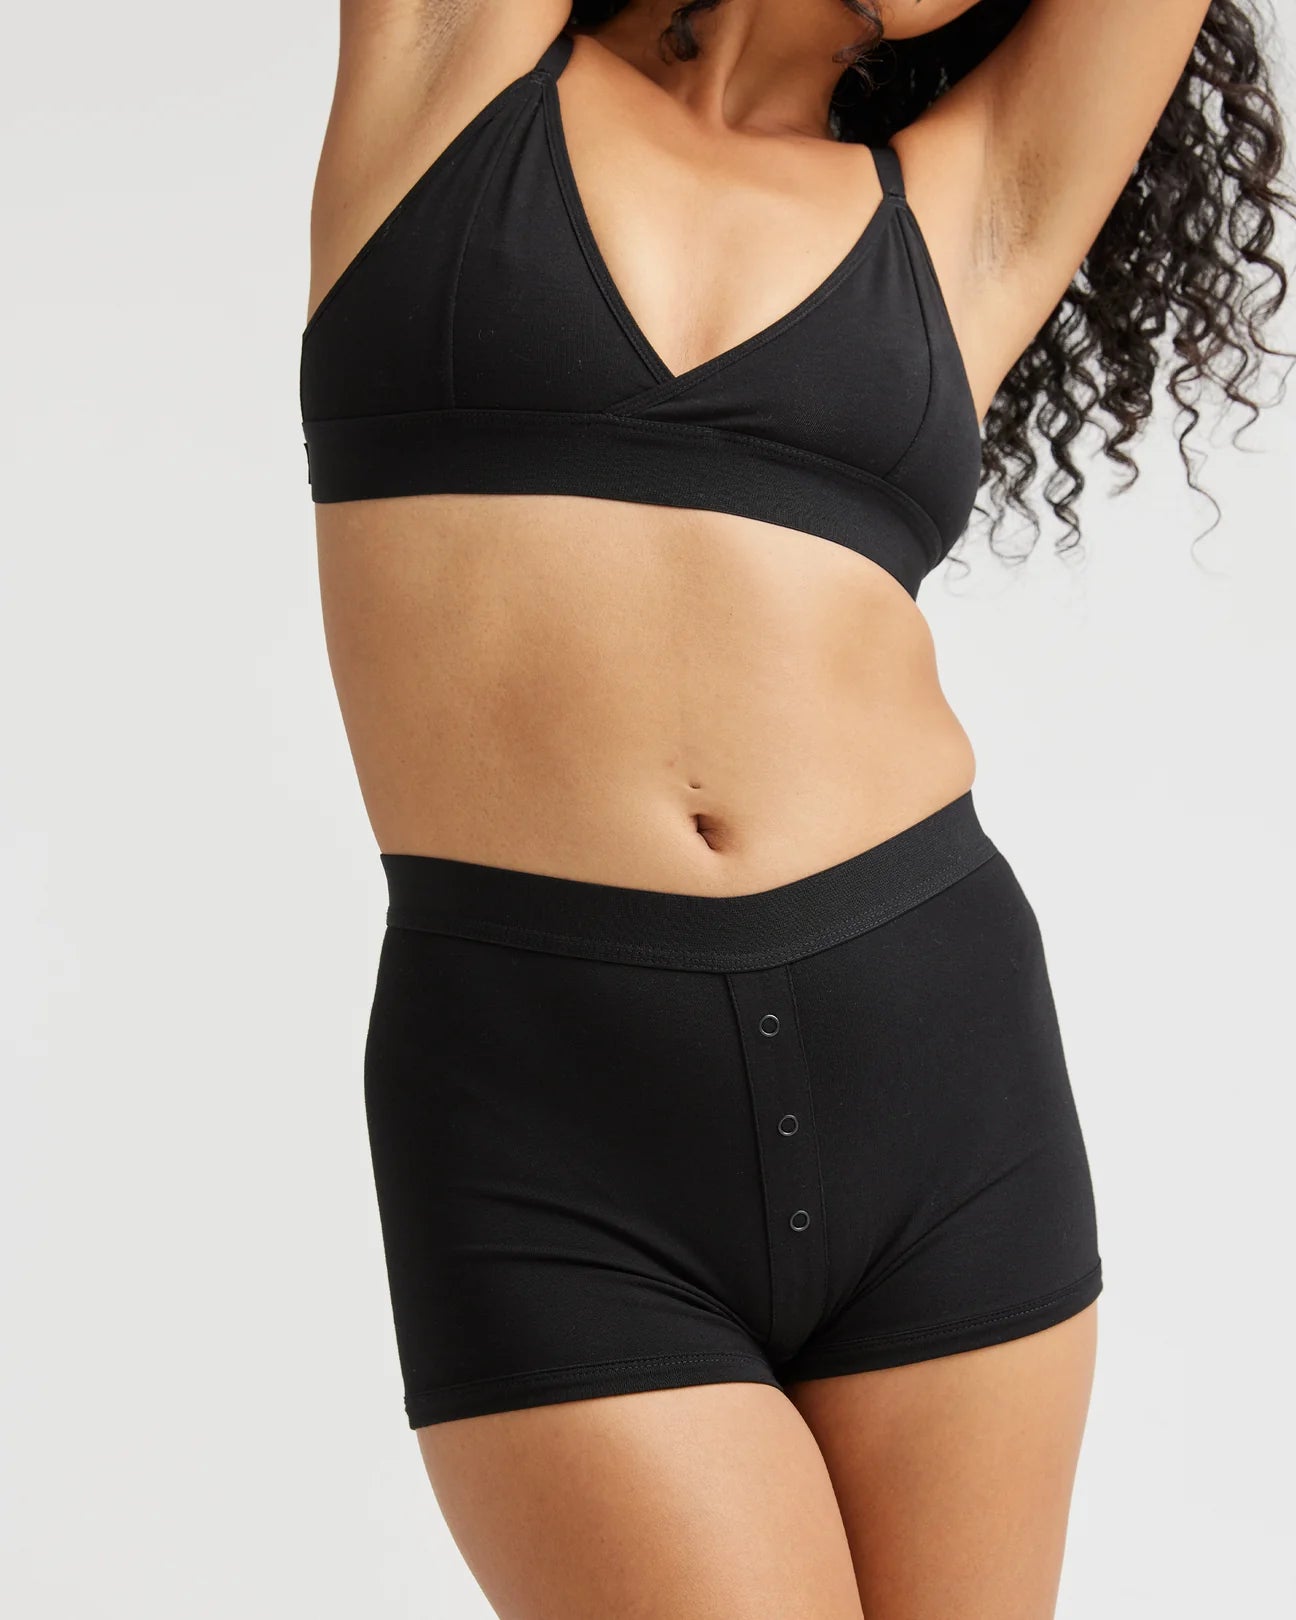 Front view of women's boxer briefs in the color black